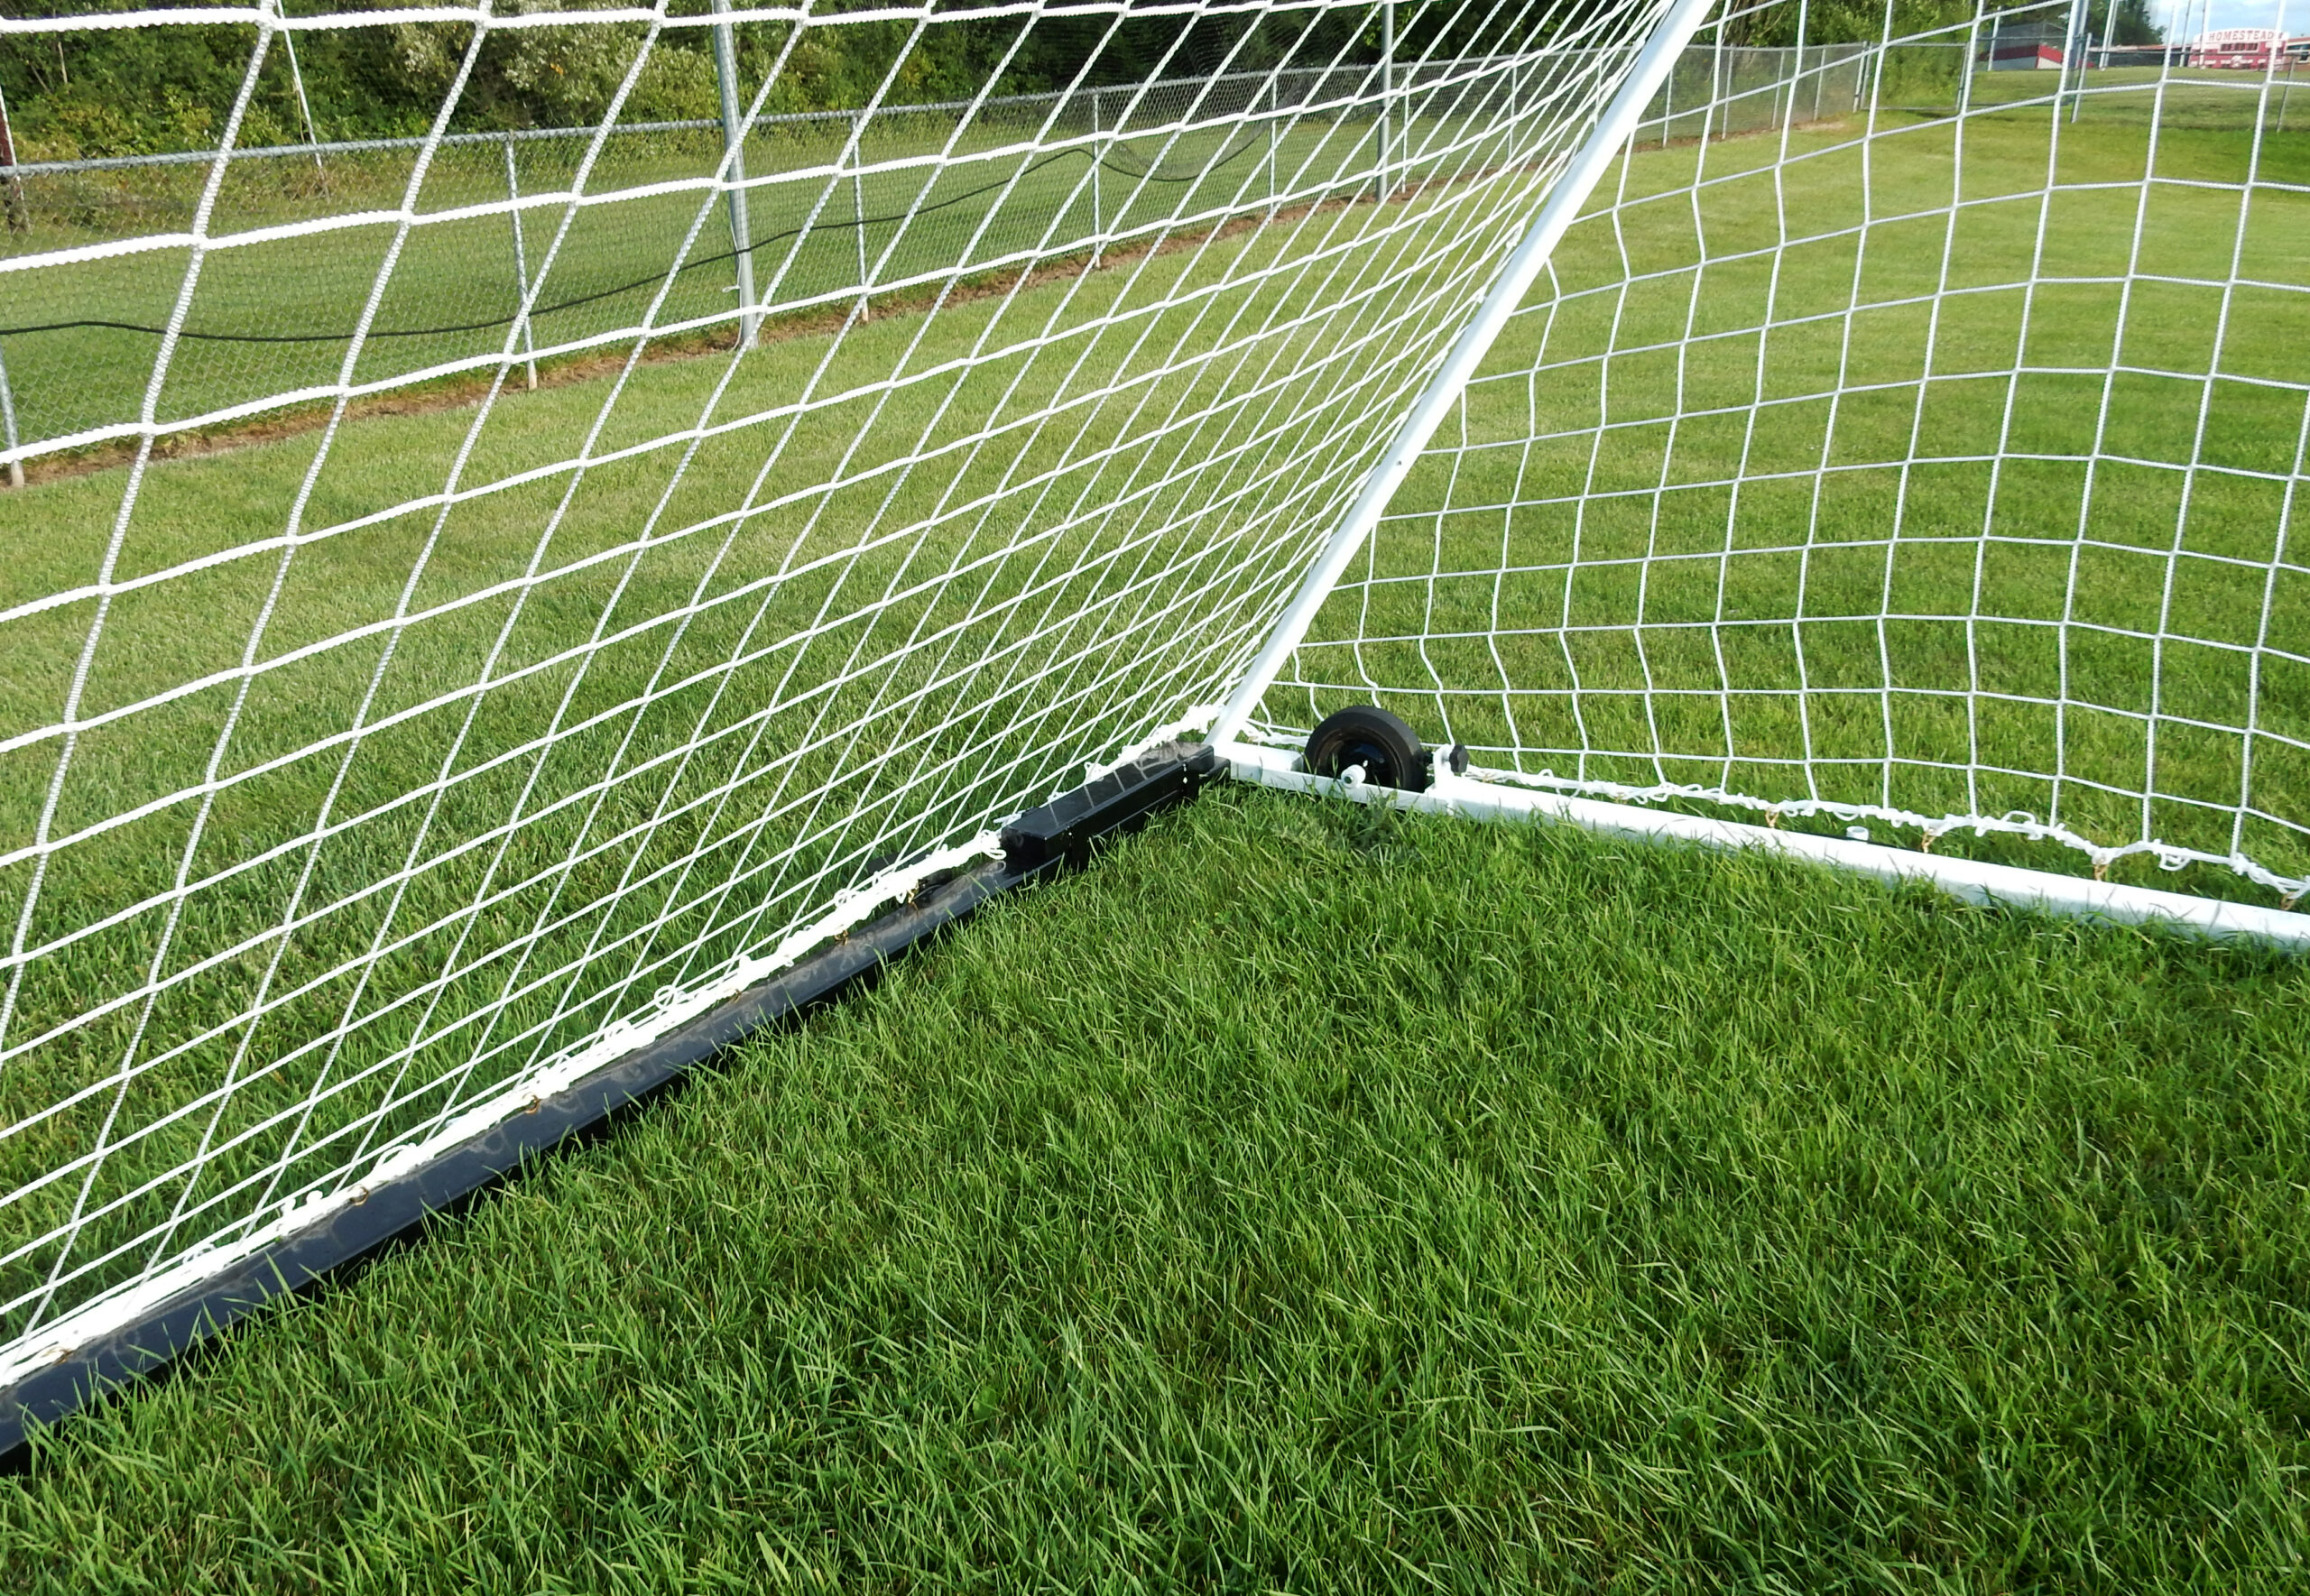 Model #ACW. Flat 25 pound anchor weight for movable soccer goal.